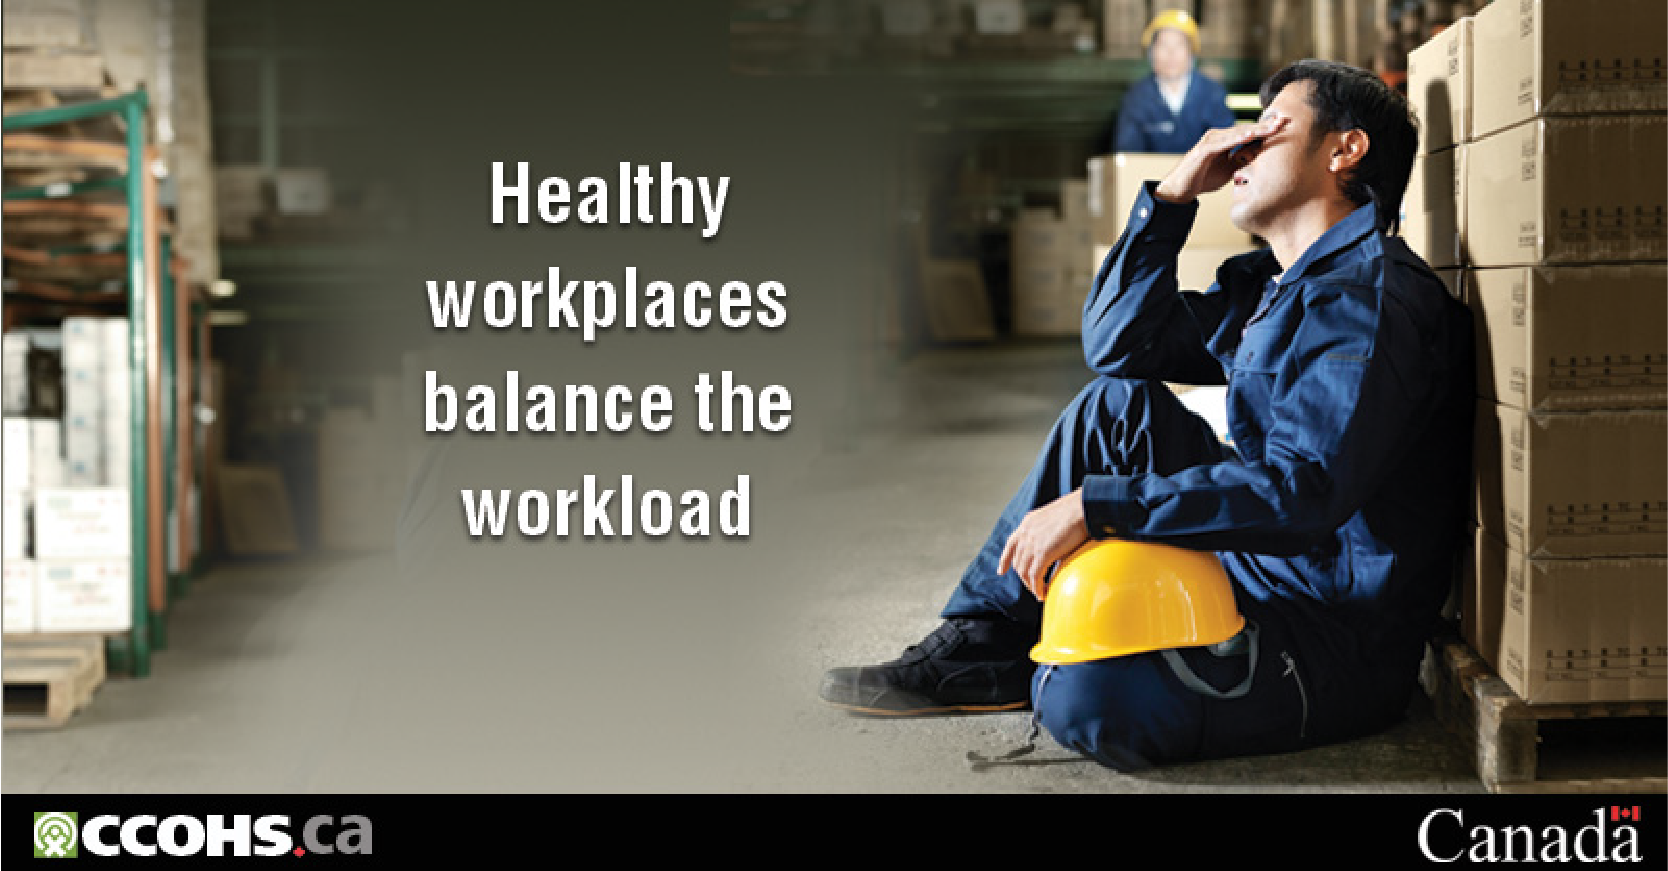 Healthy worplaces balance the workload